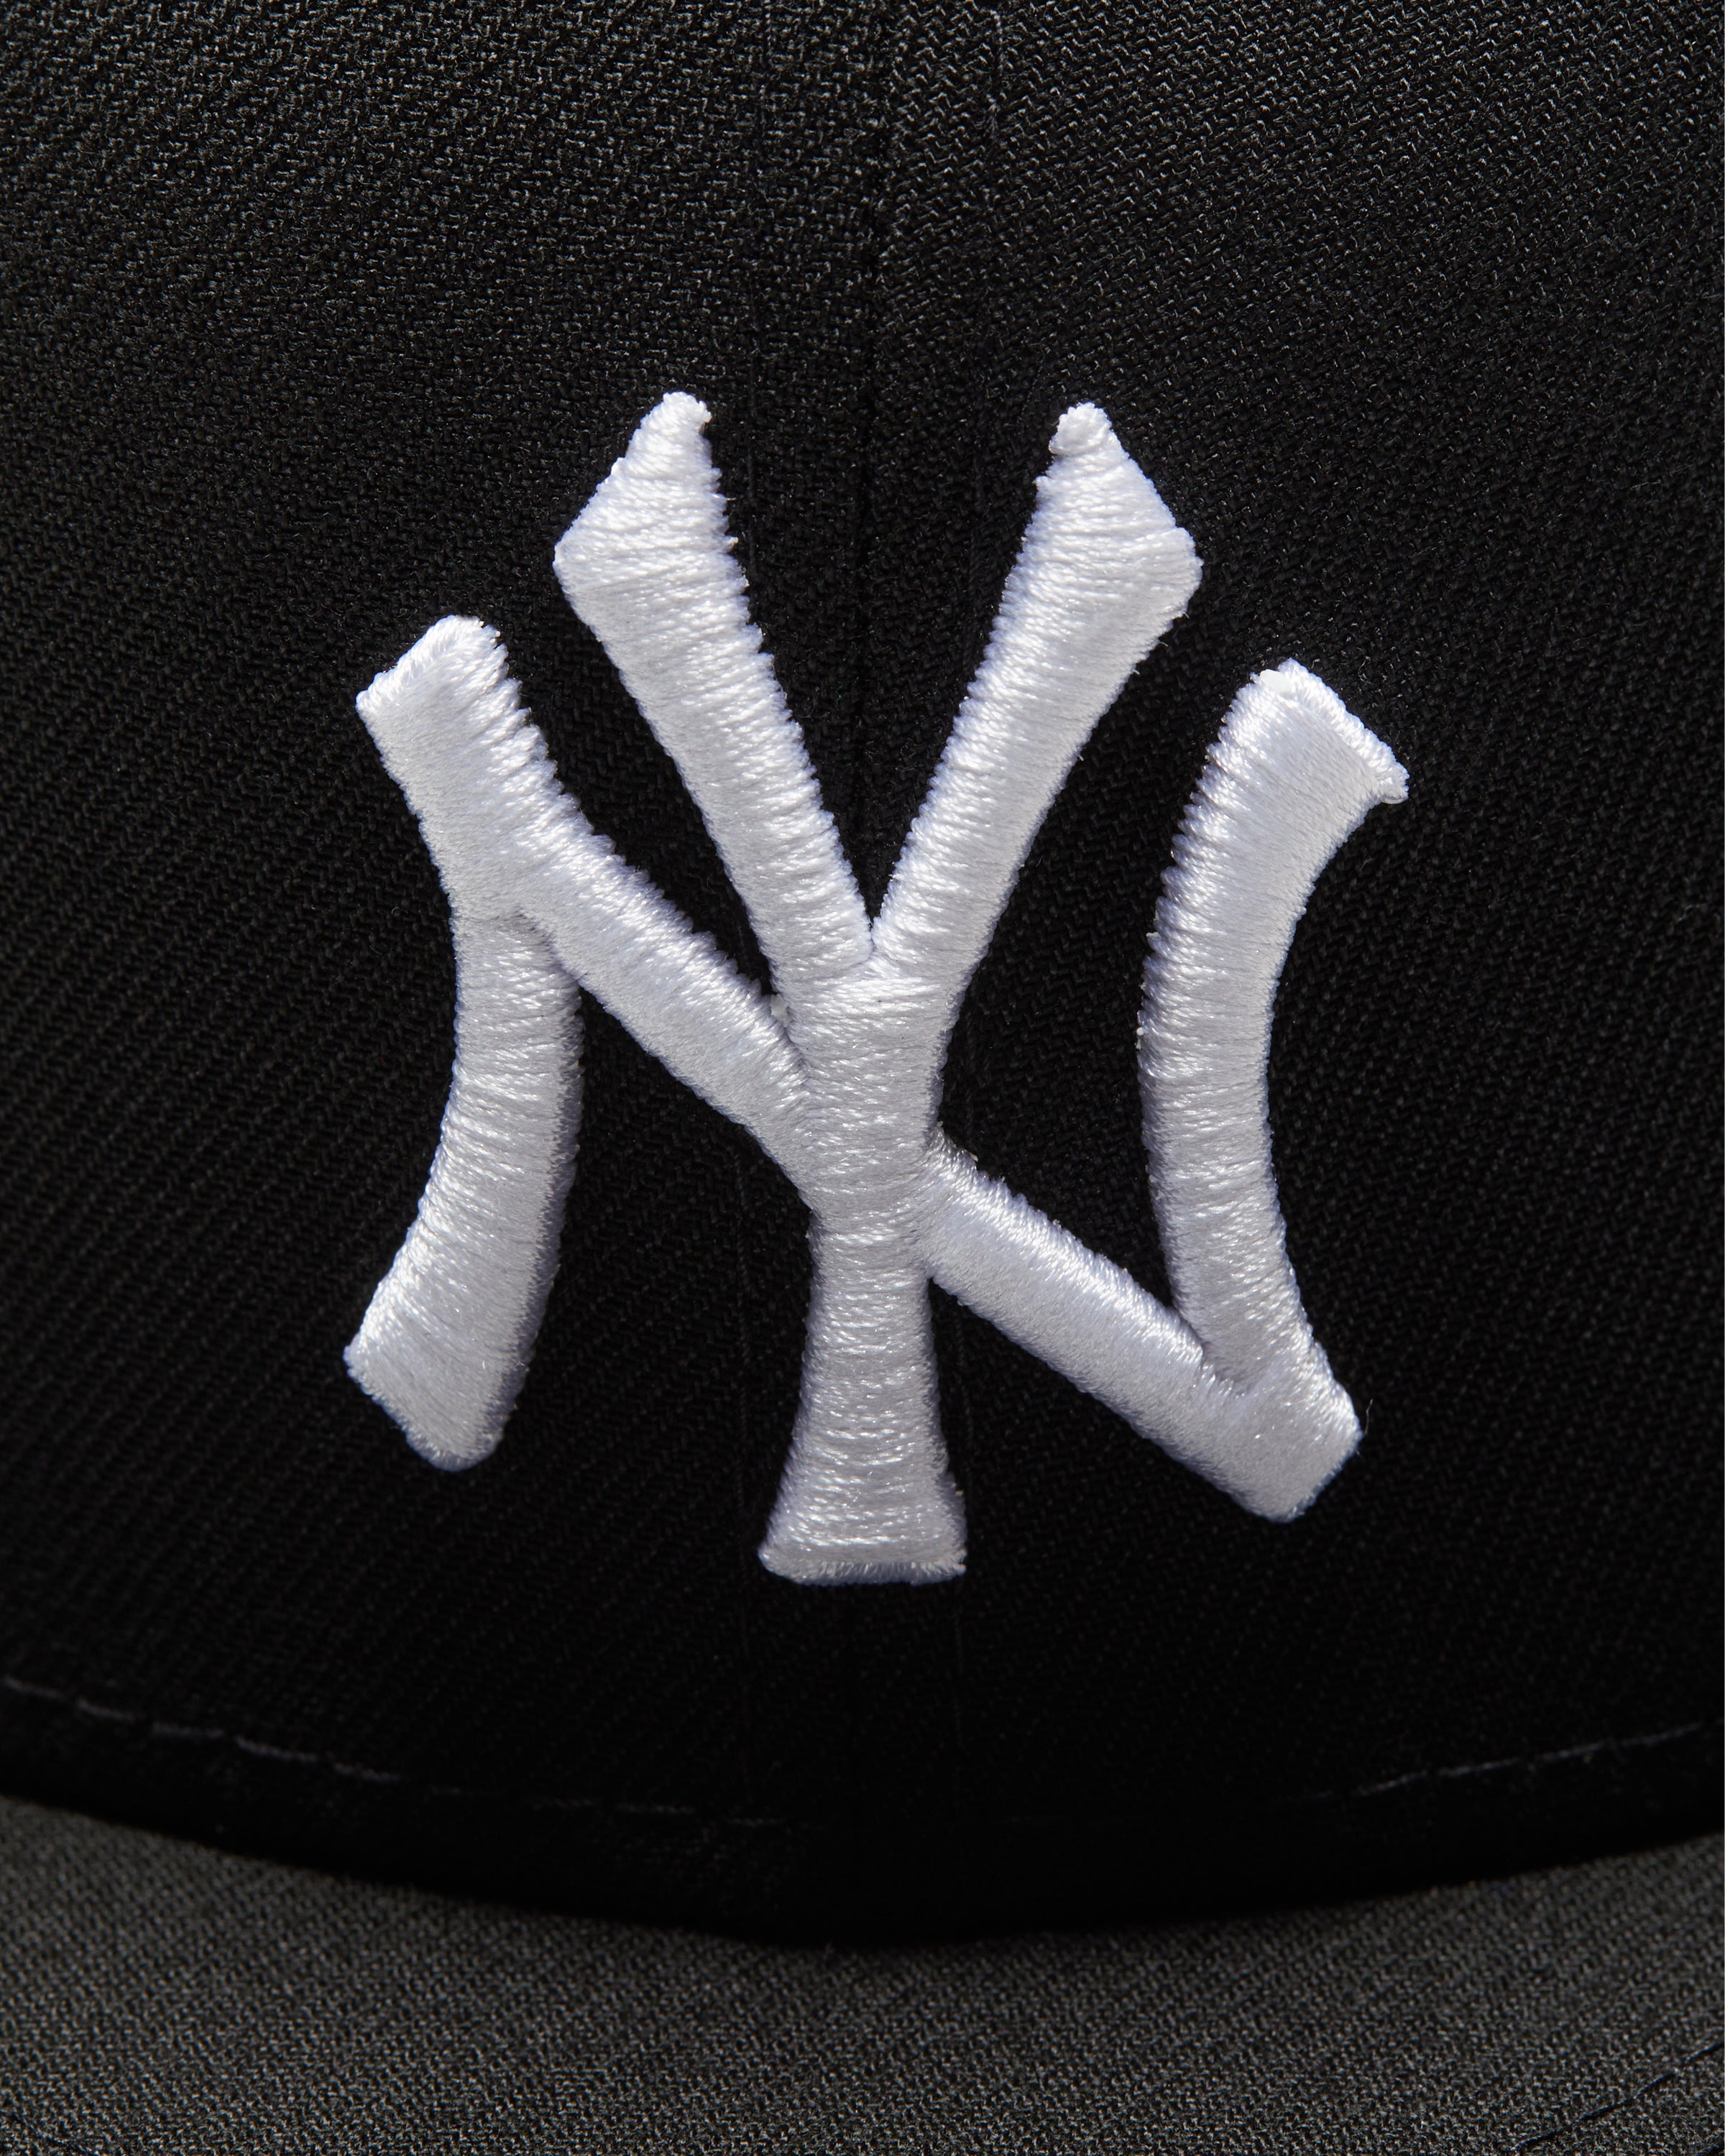 UNDEFEATED X NEW ERA NY YANKEES 59FIFTY FITTED - BLACK